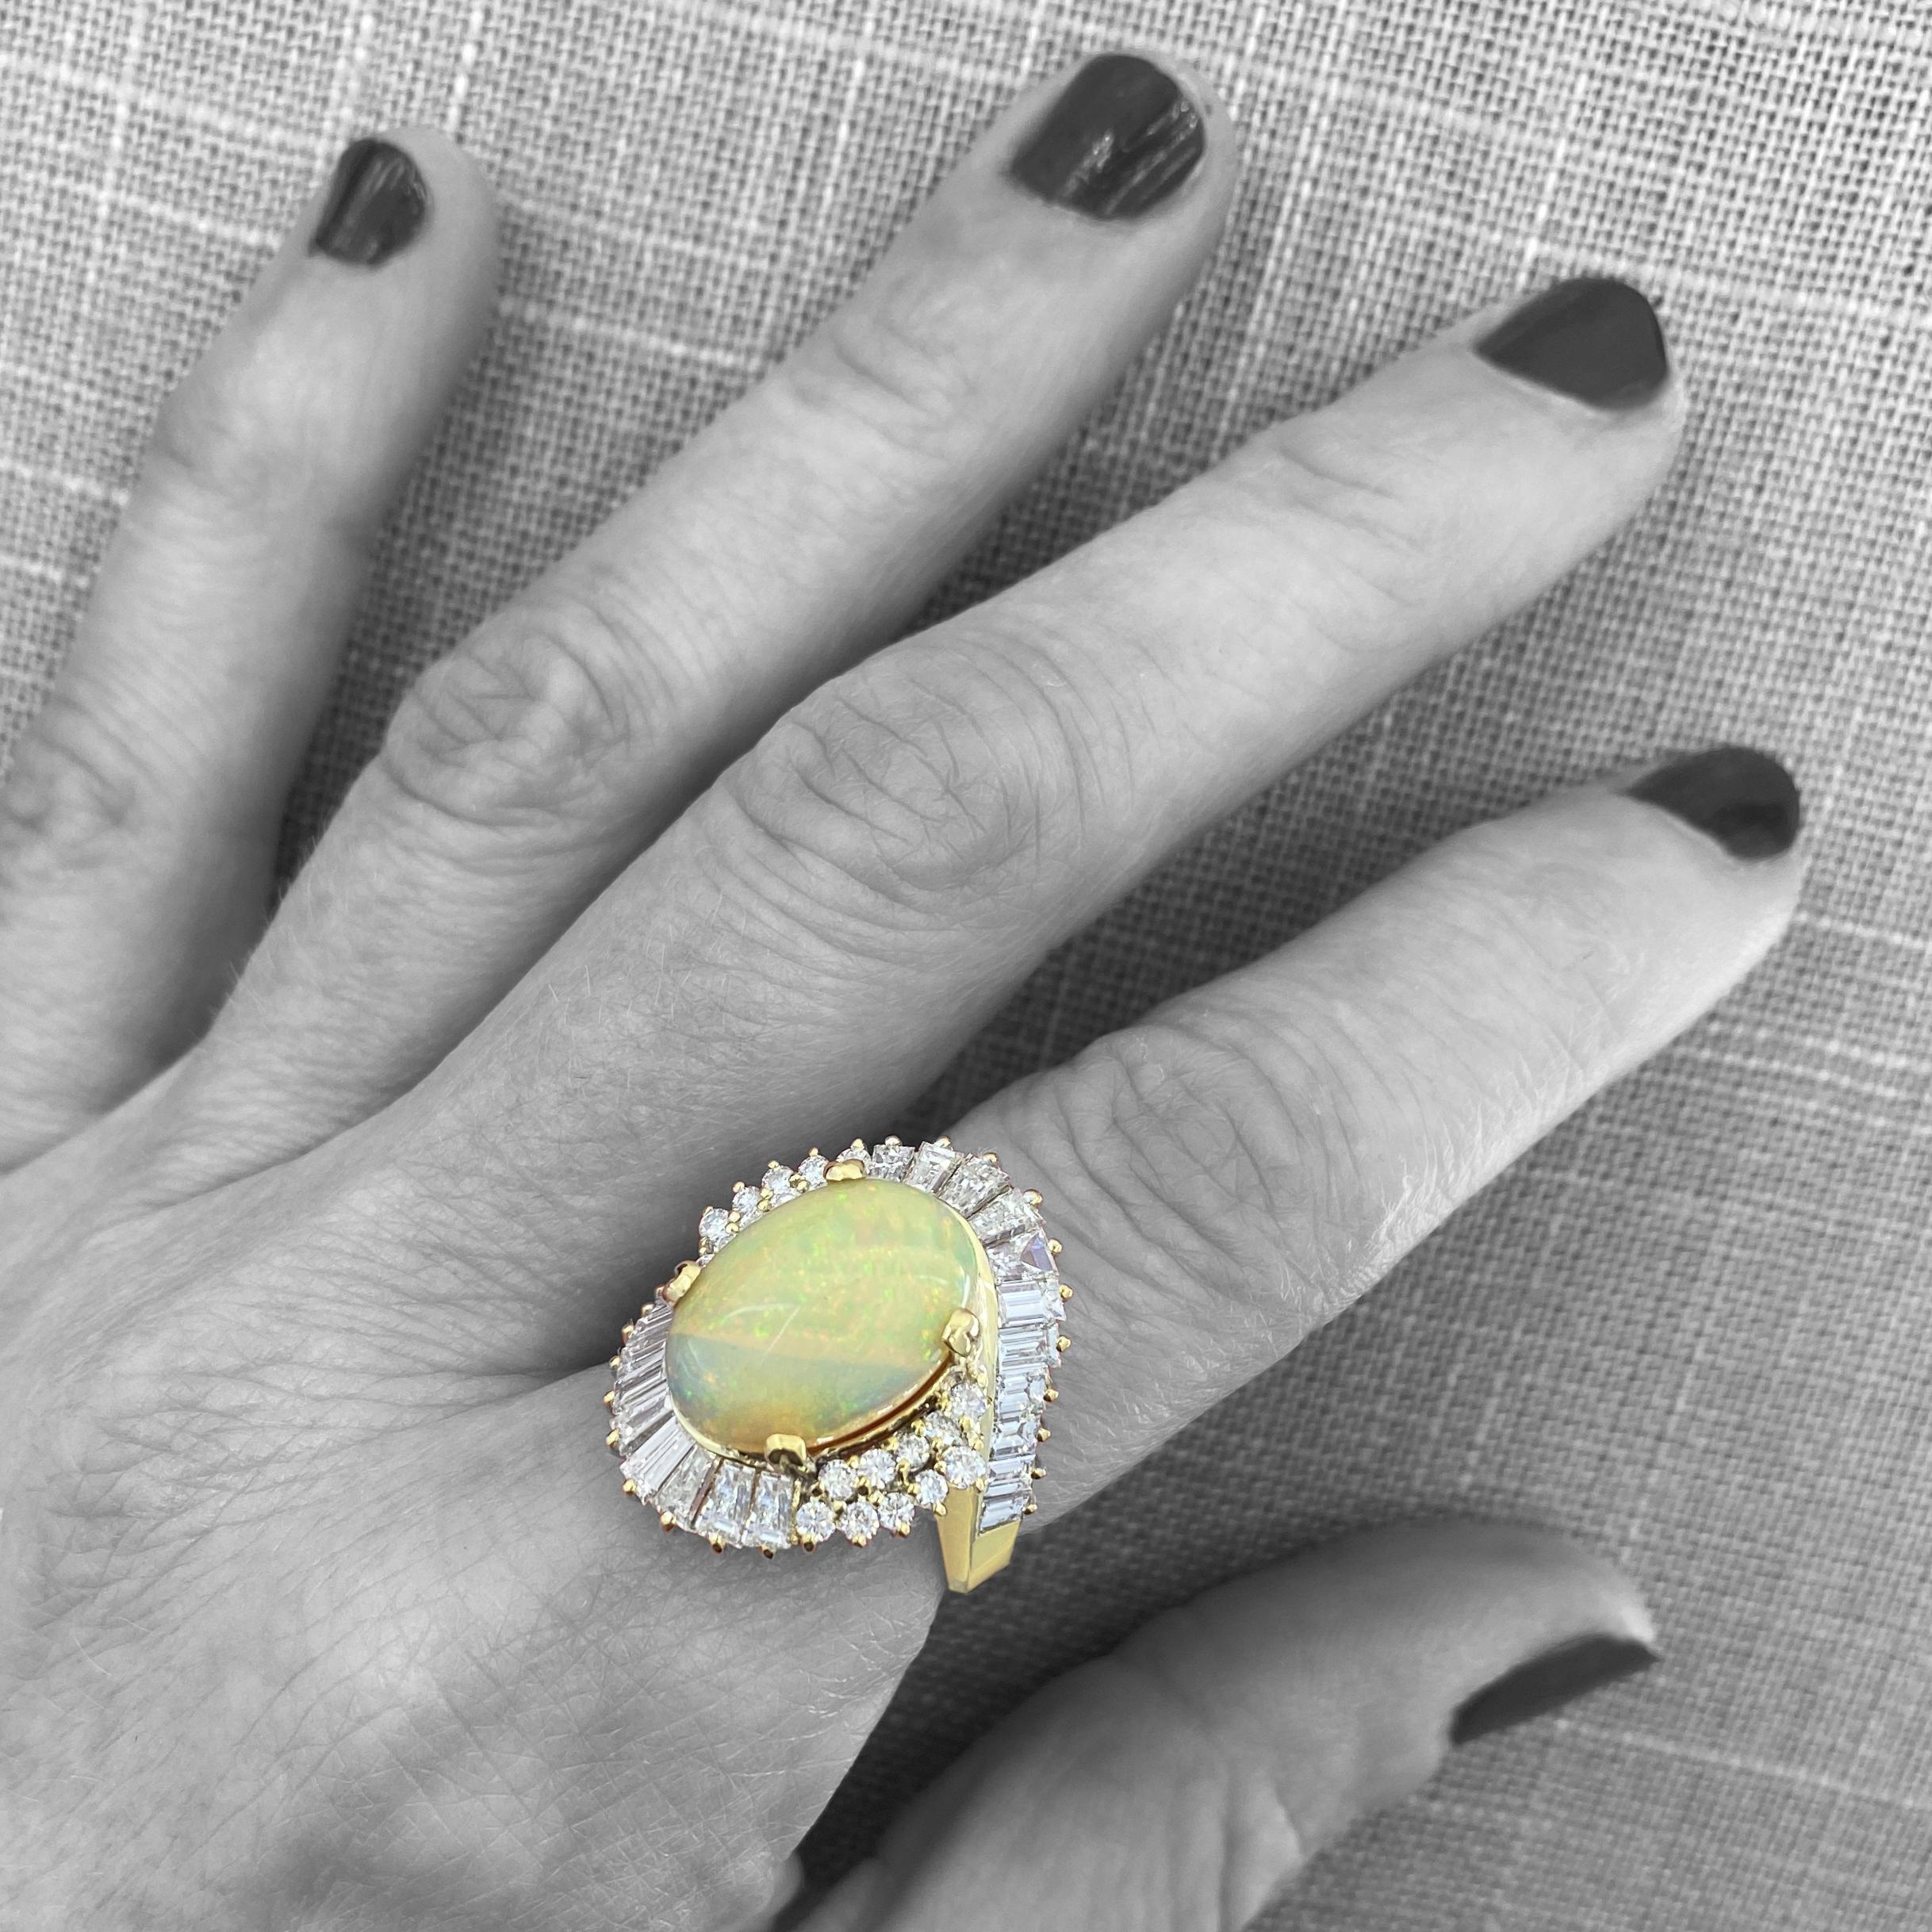 This amazing ring, probably a custom piece from the 1960s, originally featured a star sapphire, but we wanted the stone for a different ring, so we replaced it with a stunning Ethiopian white opal.  

As you can see in our photos, the dominant color